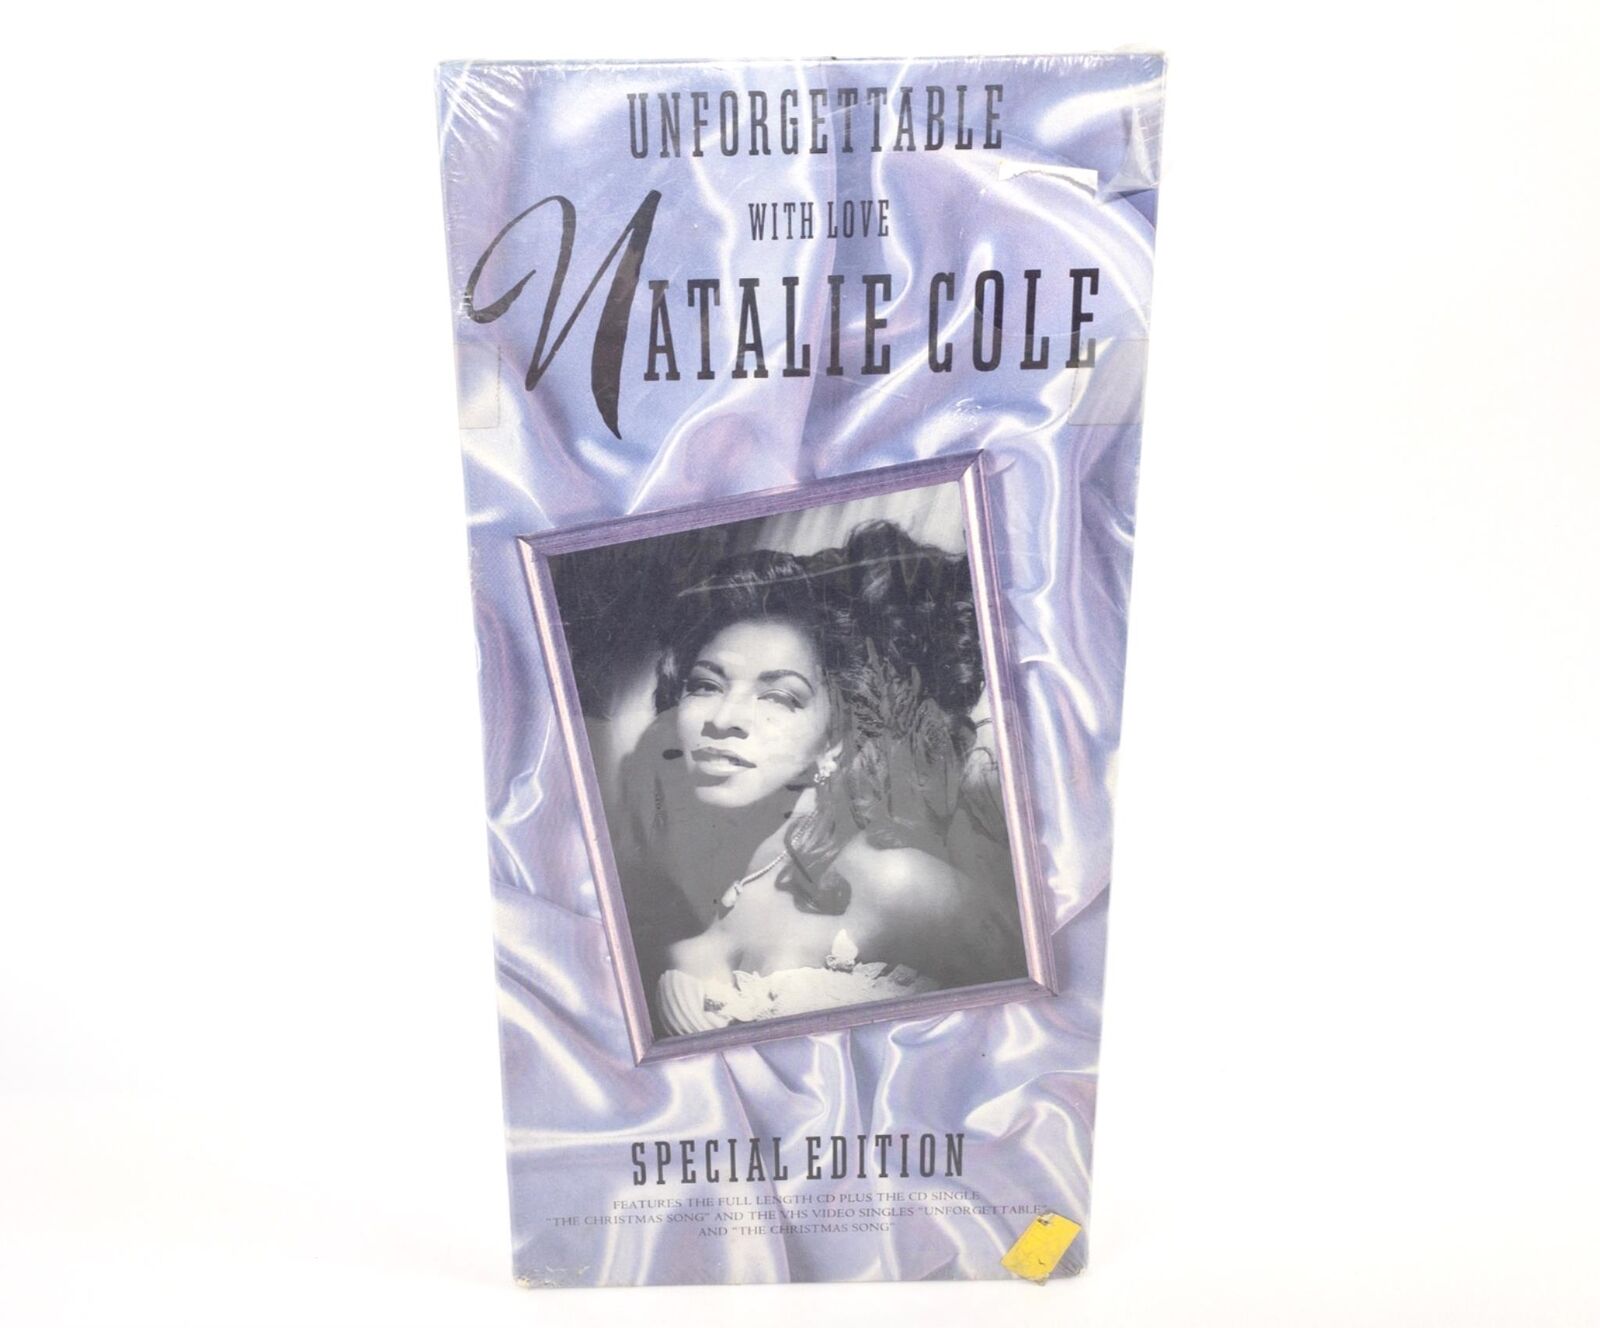 UNFORGETTABLE With Love NATALIE COLE Special Edition Box Set 2 CDs 1 VHS. Sealed